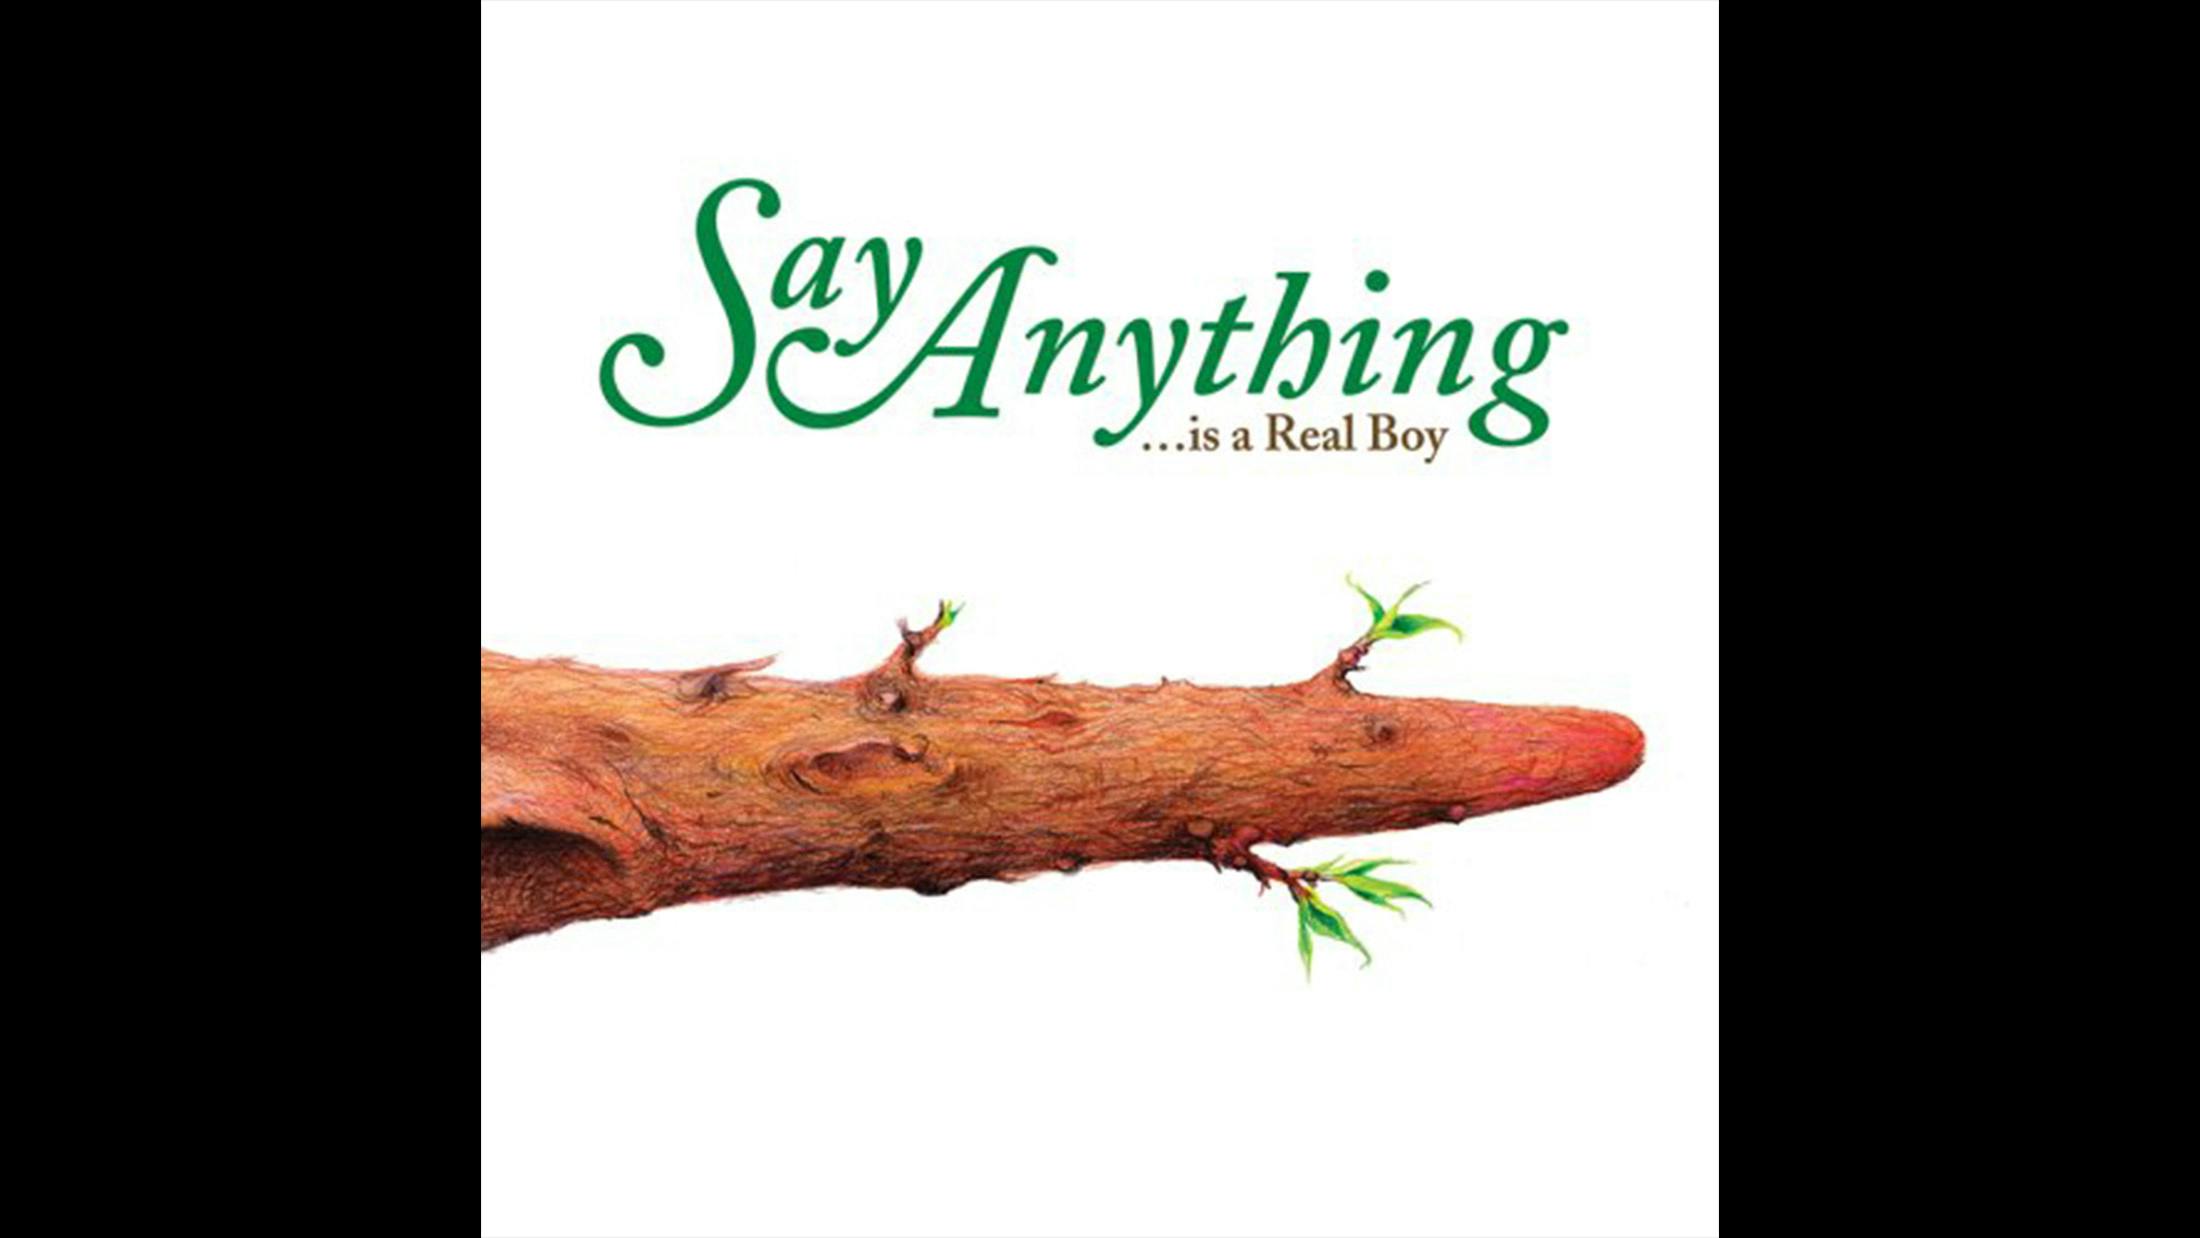 One complaint often levelled at pop-punk is that its structures and styles often follow a similar template no matter who you’re listening to. Not so with Say Anything, who, with …Is A Real Boy, dropped a debut full of quirky lyrical choices, stomping gang vocals and more songwriting imagination than most bands conjure in their entire career.